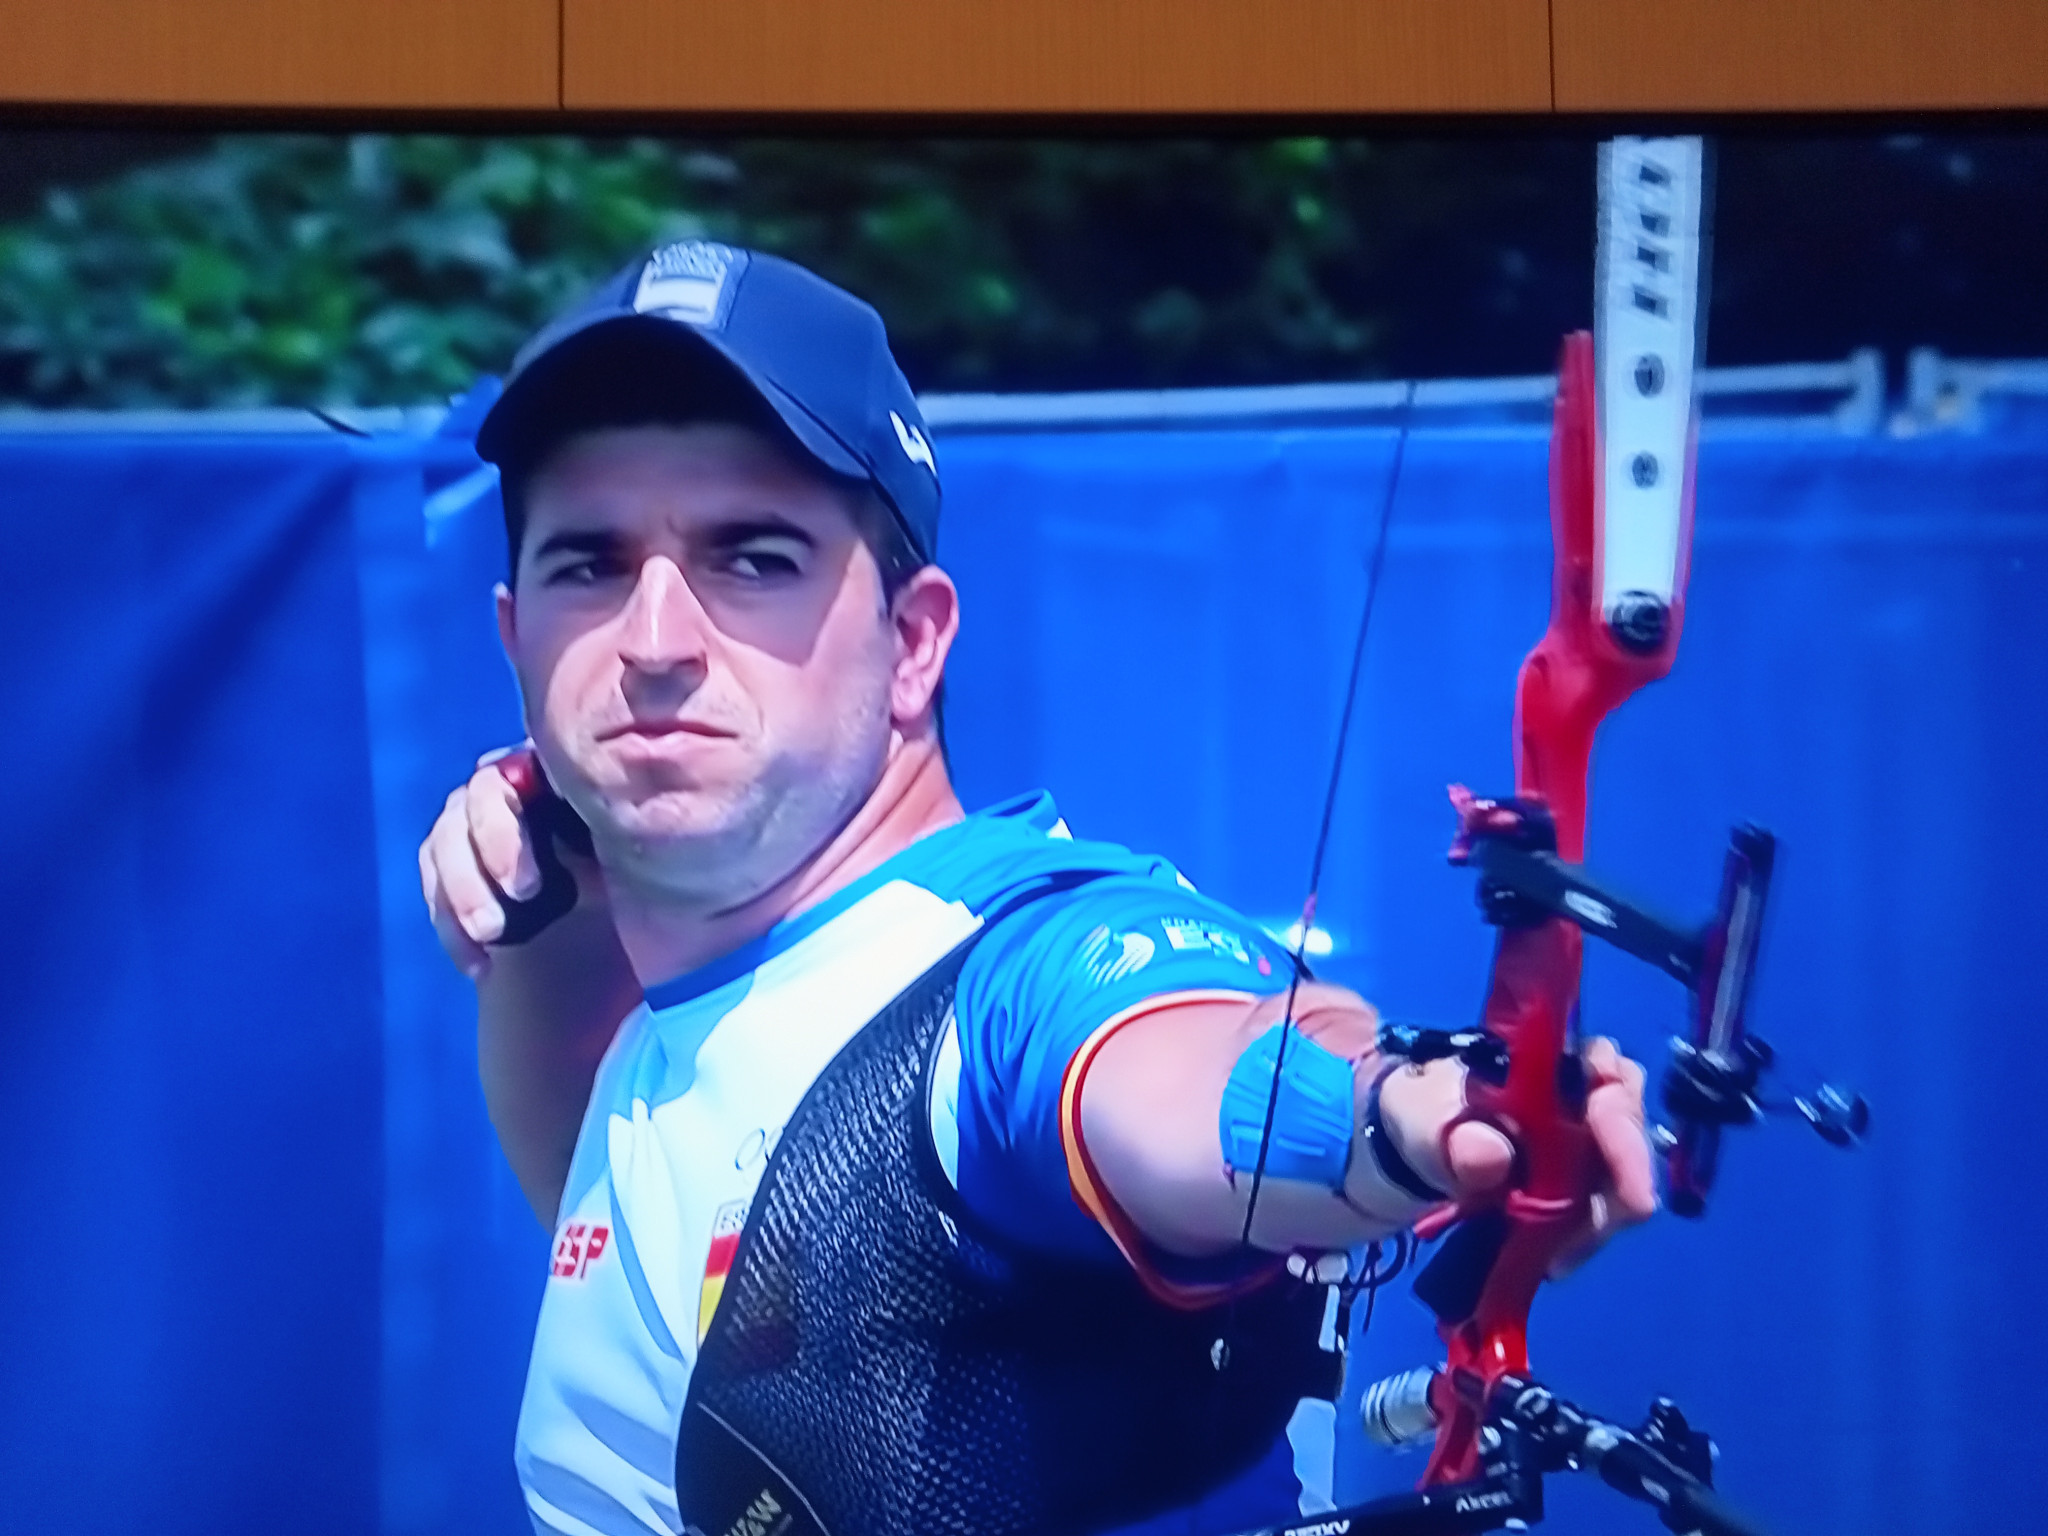 Miguel Alvarino Garcia of Spain defeated Turkey's Olympic champion Mete Gazoz en route to reaching the men's recurve final at the European Games - but then lost 6-2 to Germany's Florian Unruh ©ITG